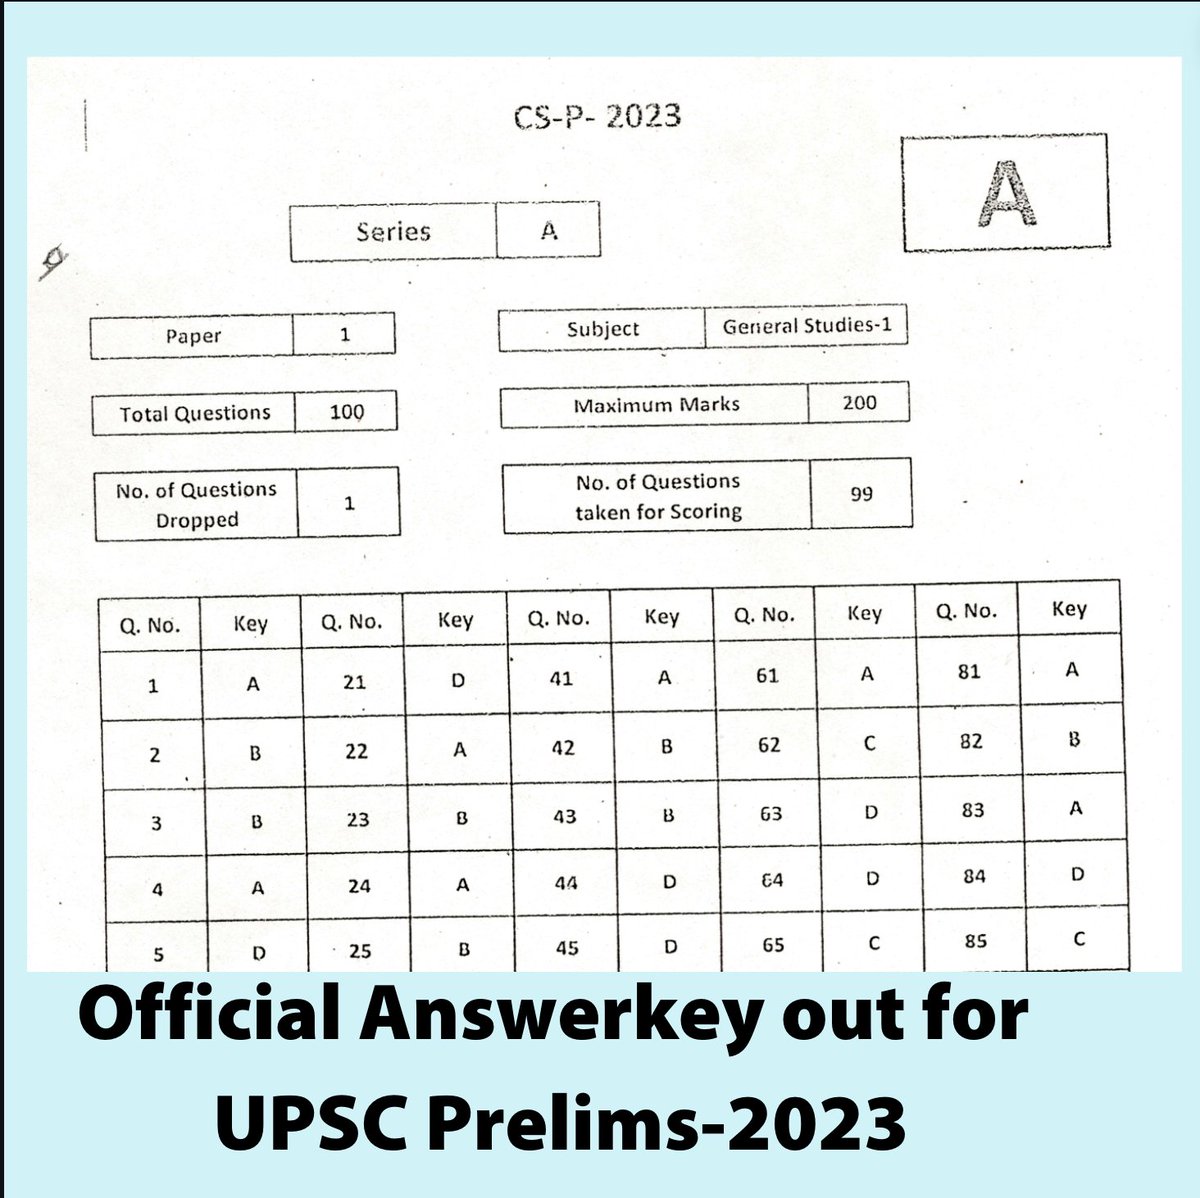 official answerkey out for UPSC Prelims-2023 (after 1 year)

paper1 GS - Answerkey
upsc.gov.in/sites/default/…

paper2 CSAT - Answerkey 
upsc.gov.in/sites/default/…

Download Questionpapers from
Questionpaper -GS1: 
upsc.gov.in/sites/default/…

Questionpaper -CSAT:
upsc.gov.in/sites/default/…